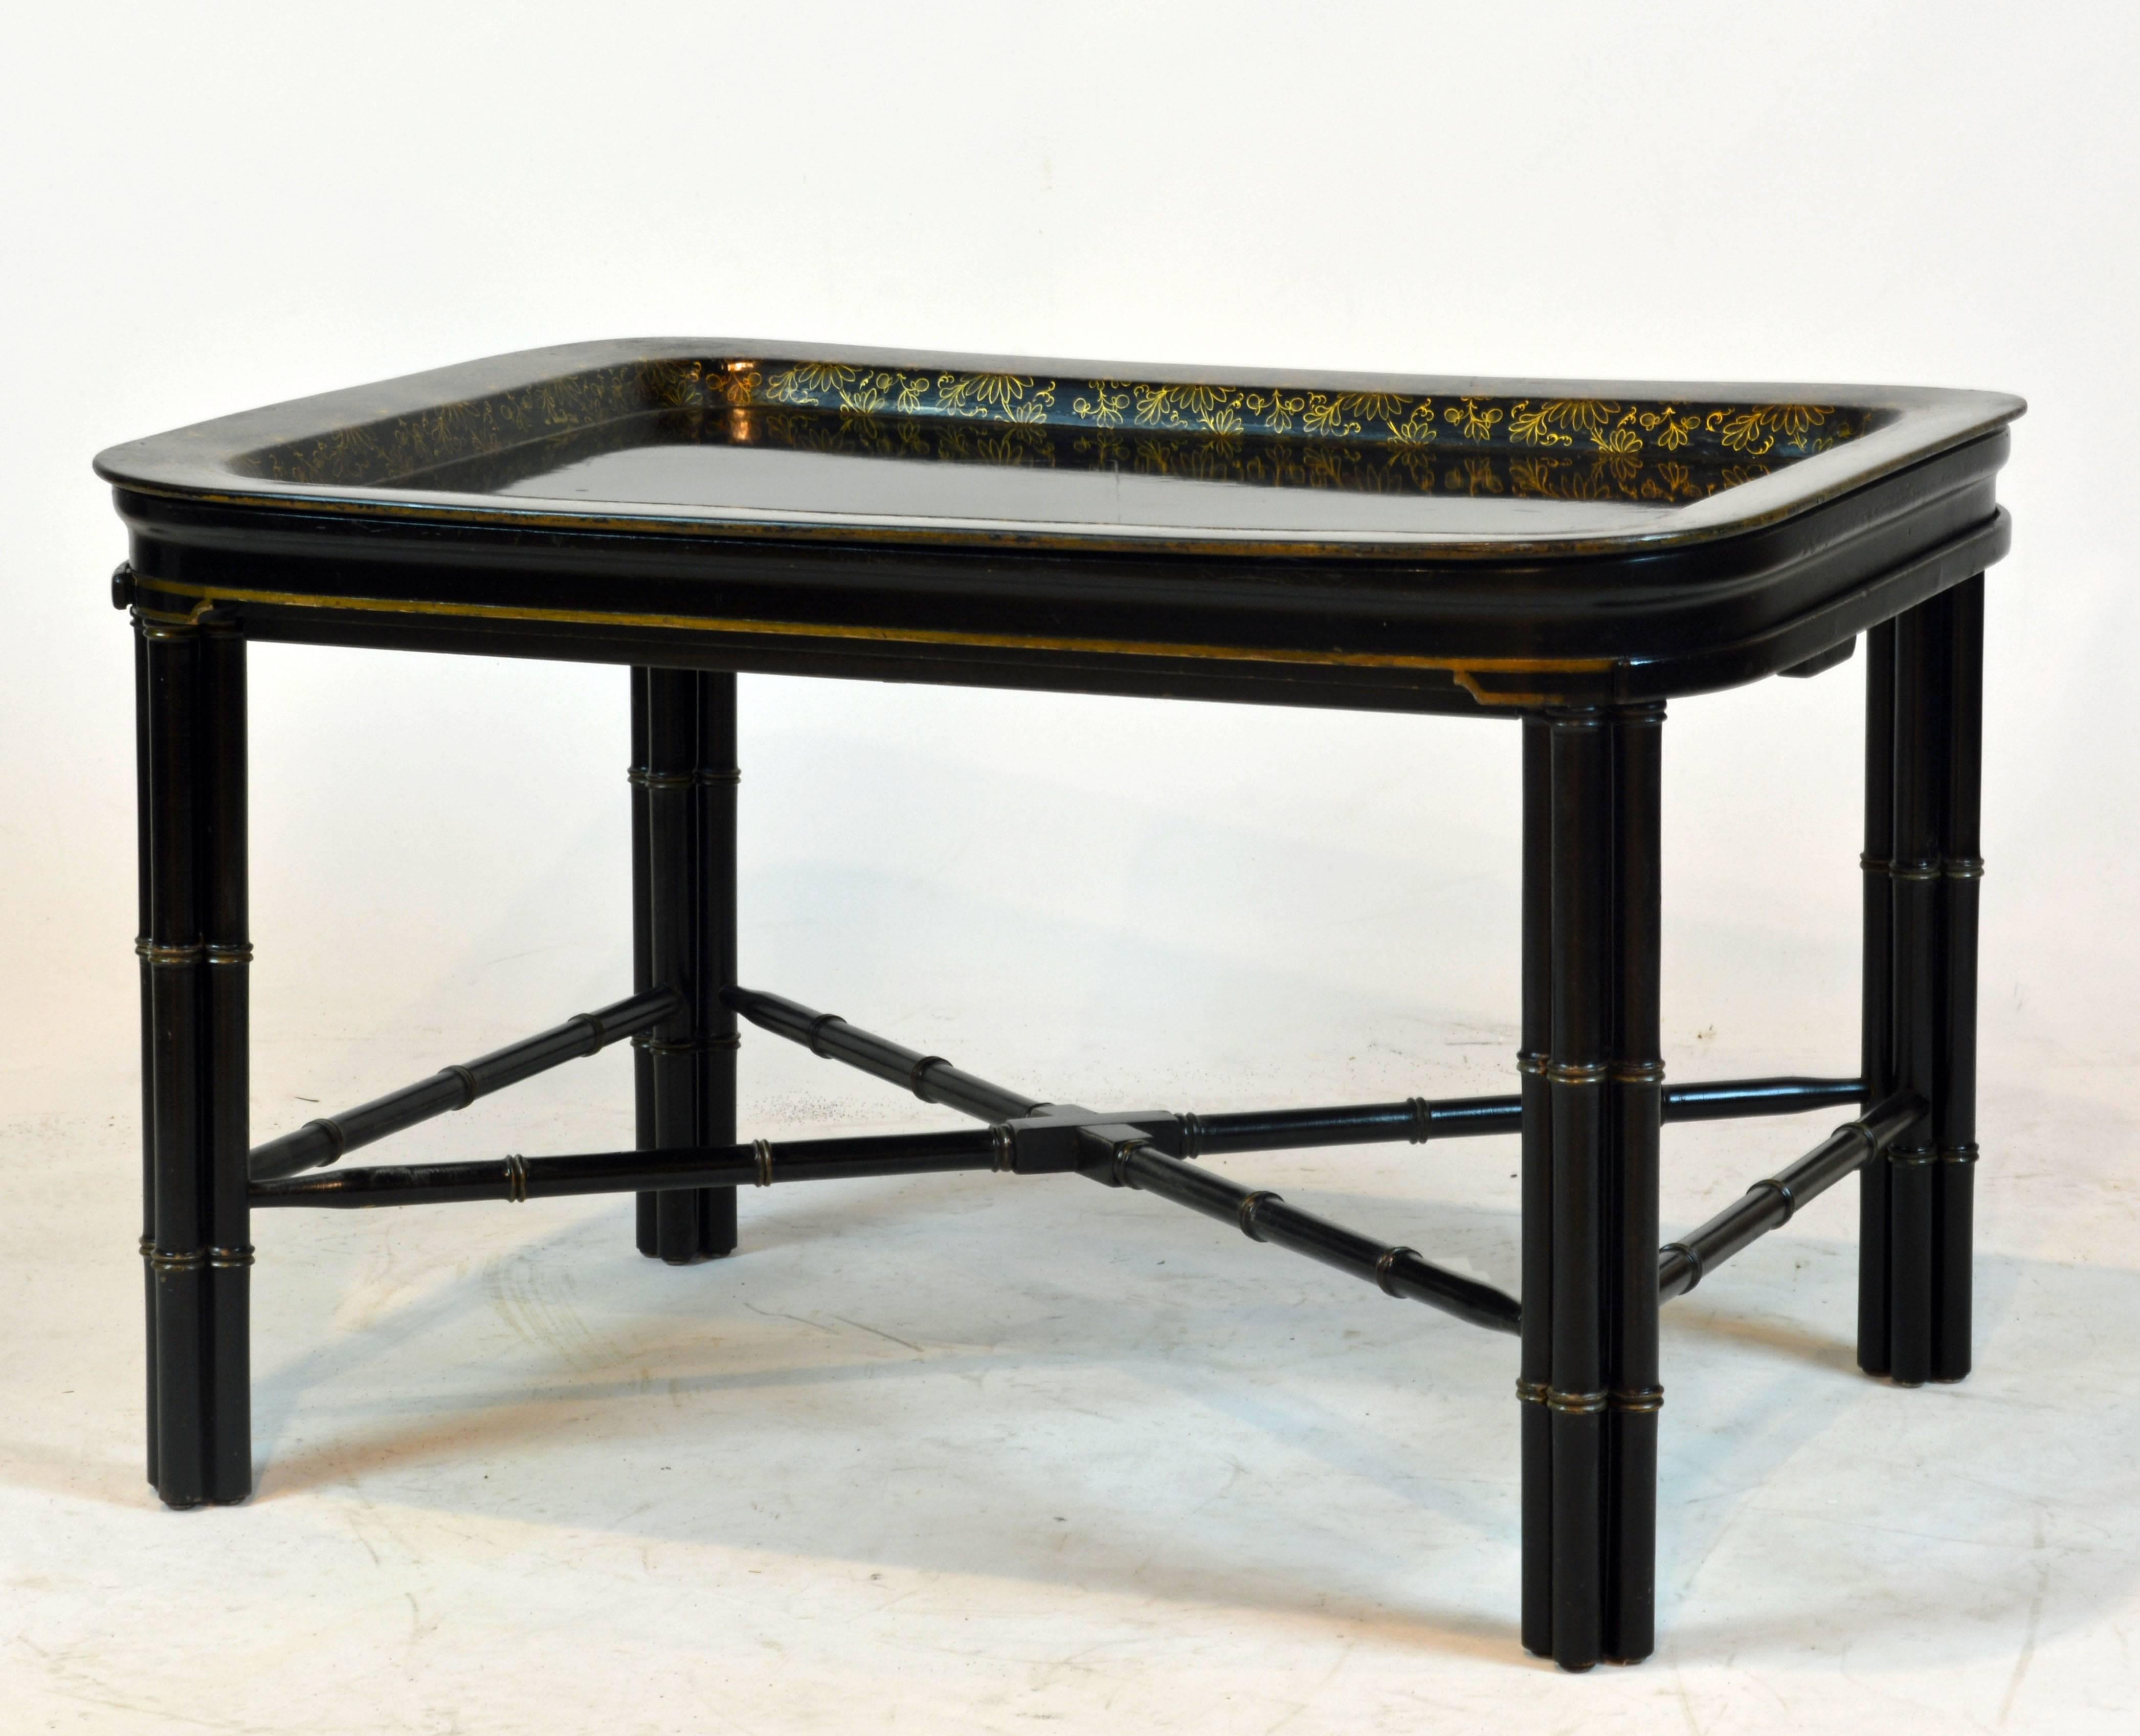 This fine and unusual table features a gilt decorated papier mâché removable tray on an elegant ebonized faux bamboo stand. If desired the table expands with pull-outs in both ends.